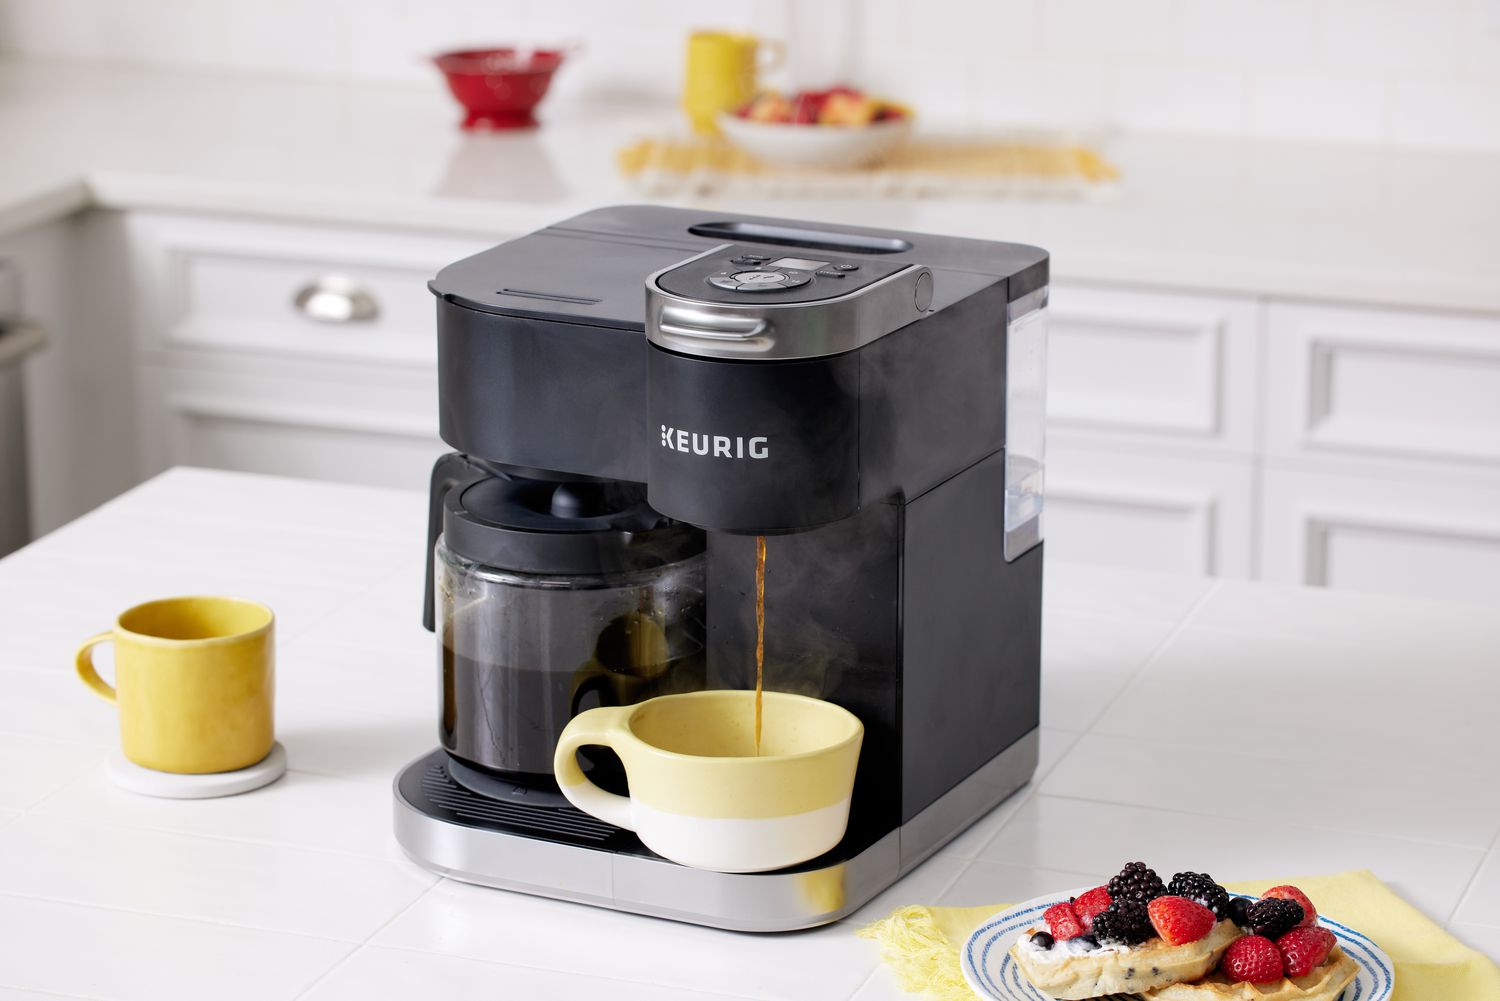 Keurig K-Duo Coffee Maker pouring coffee into a cup next to a plate with pancakes